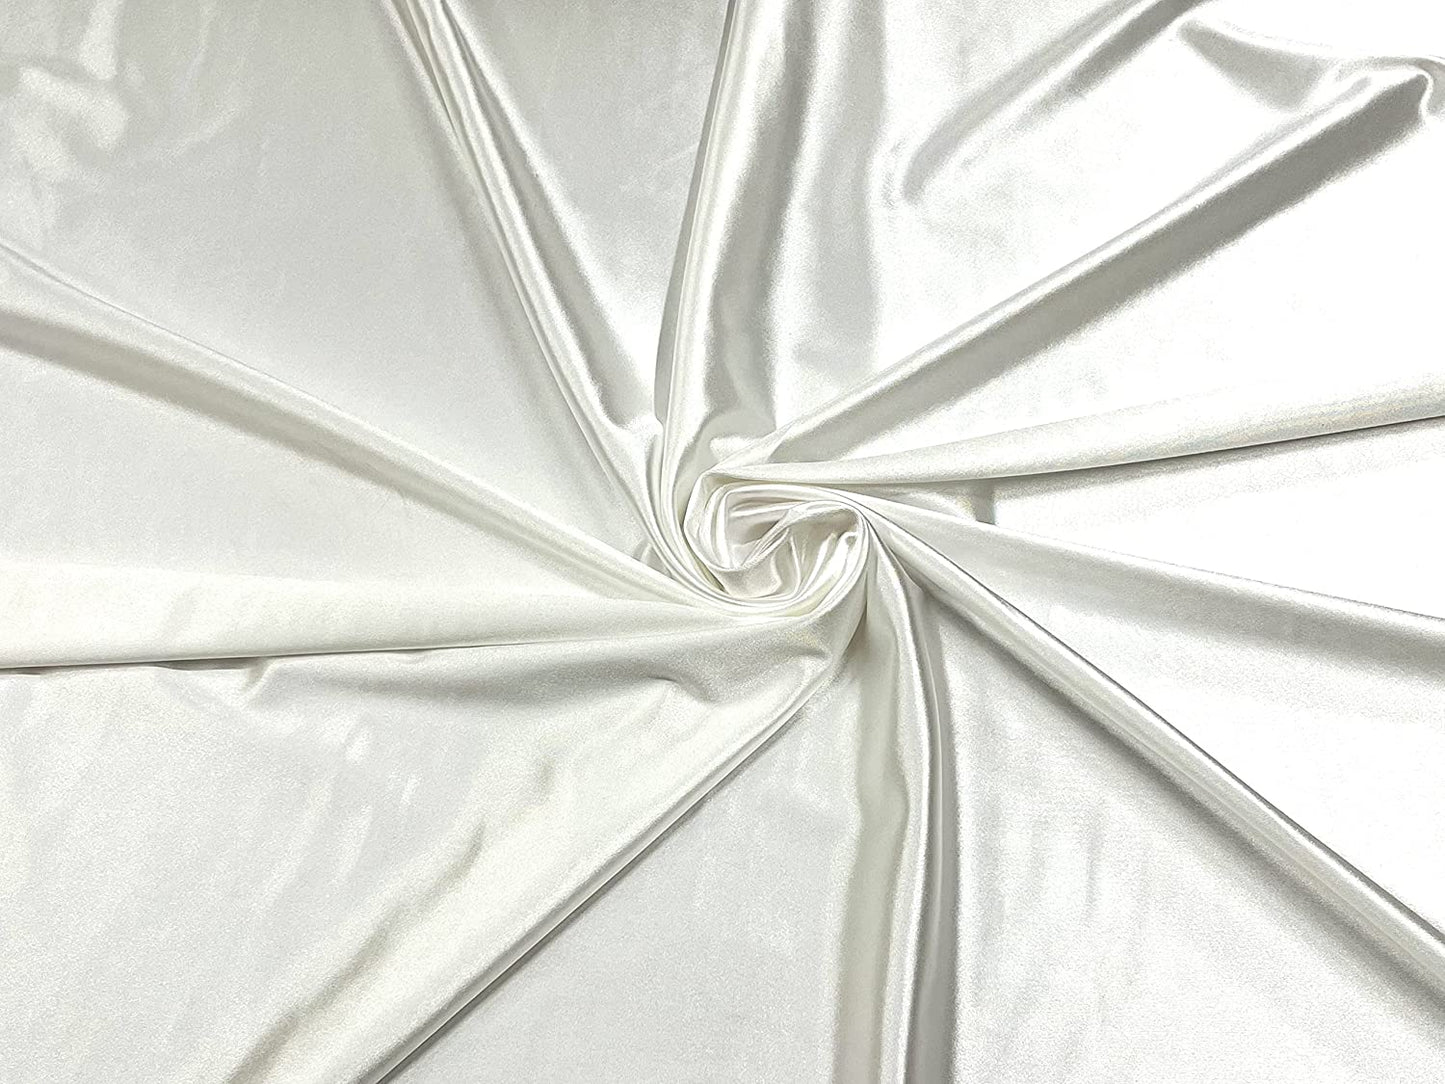 Deluxe Shiny Polyester Spandex Stretch Fabric (1 Yard, Off White)